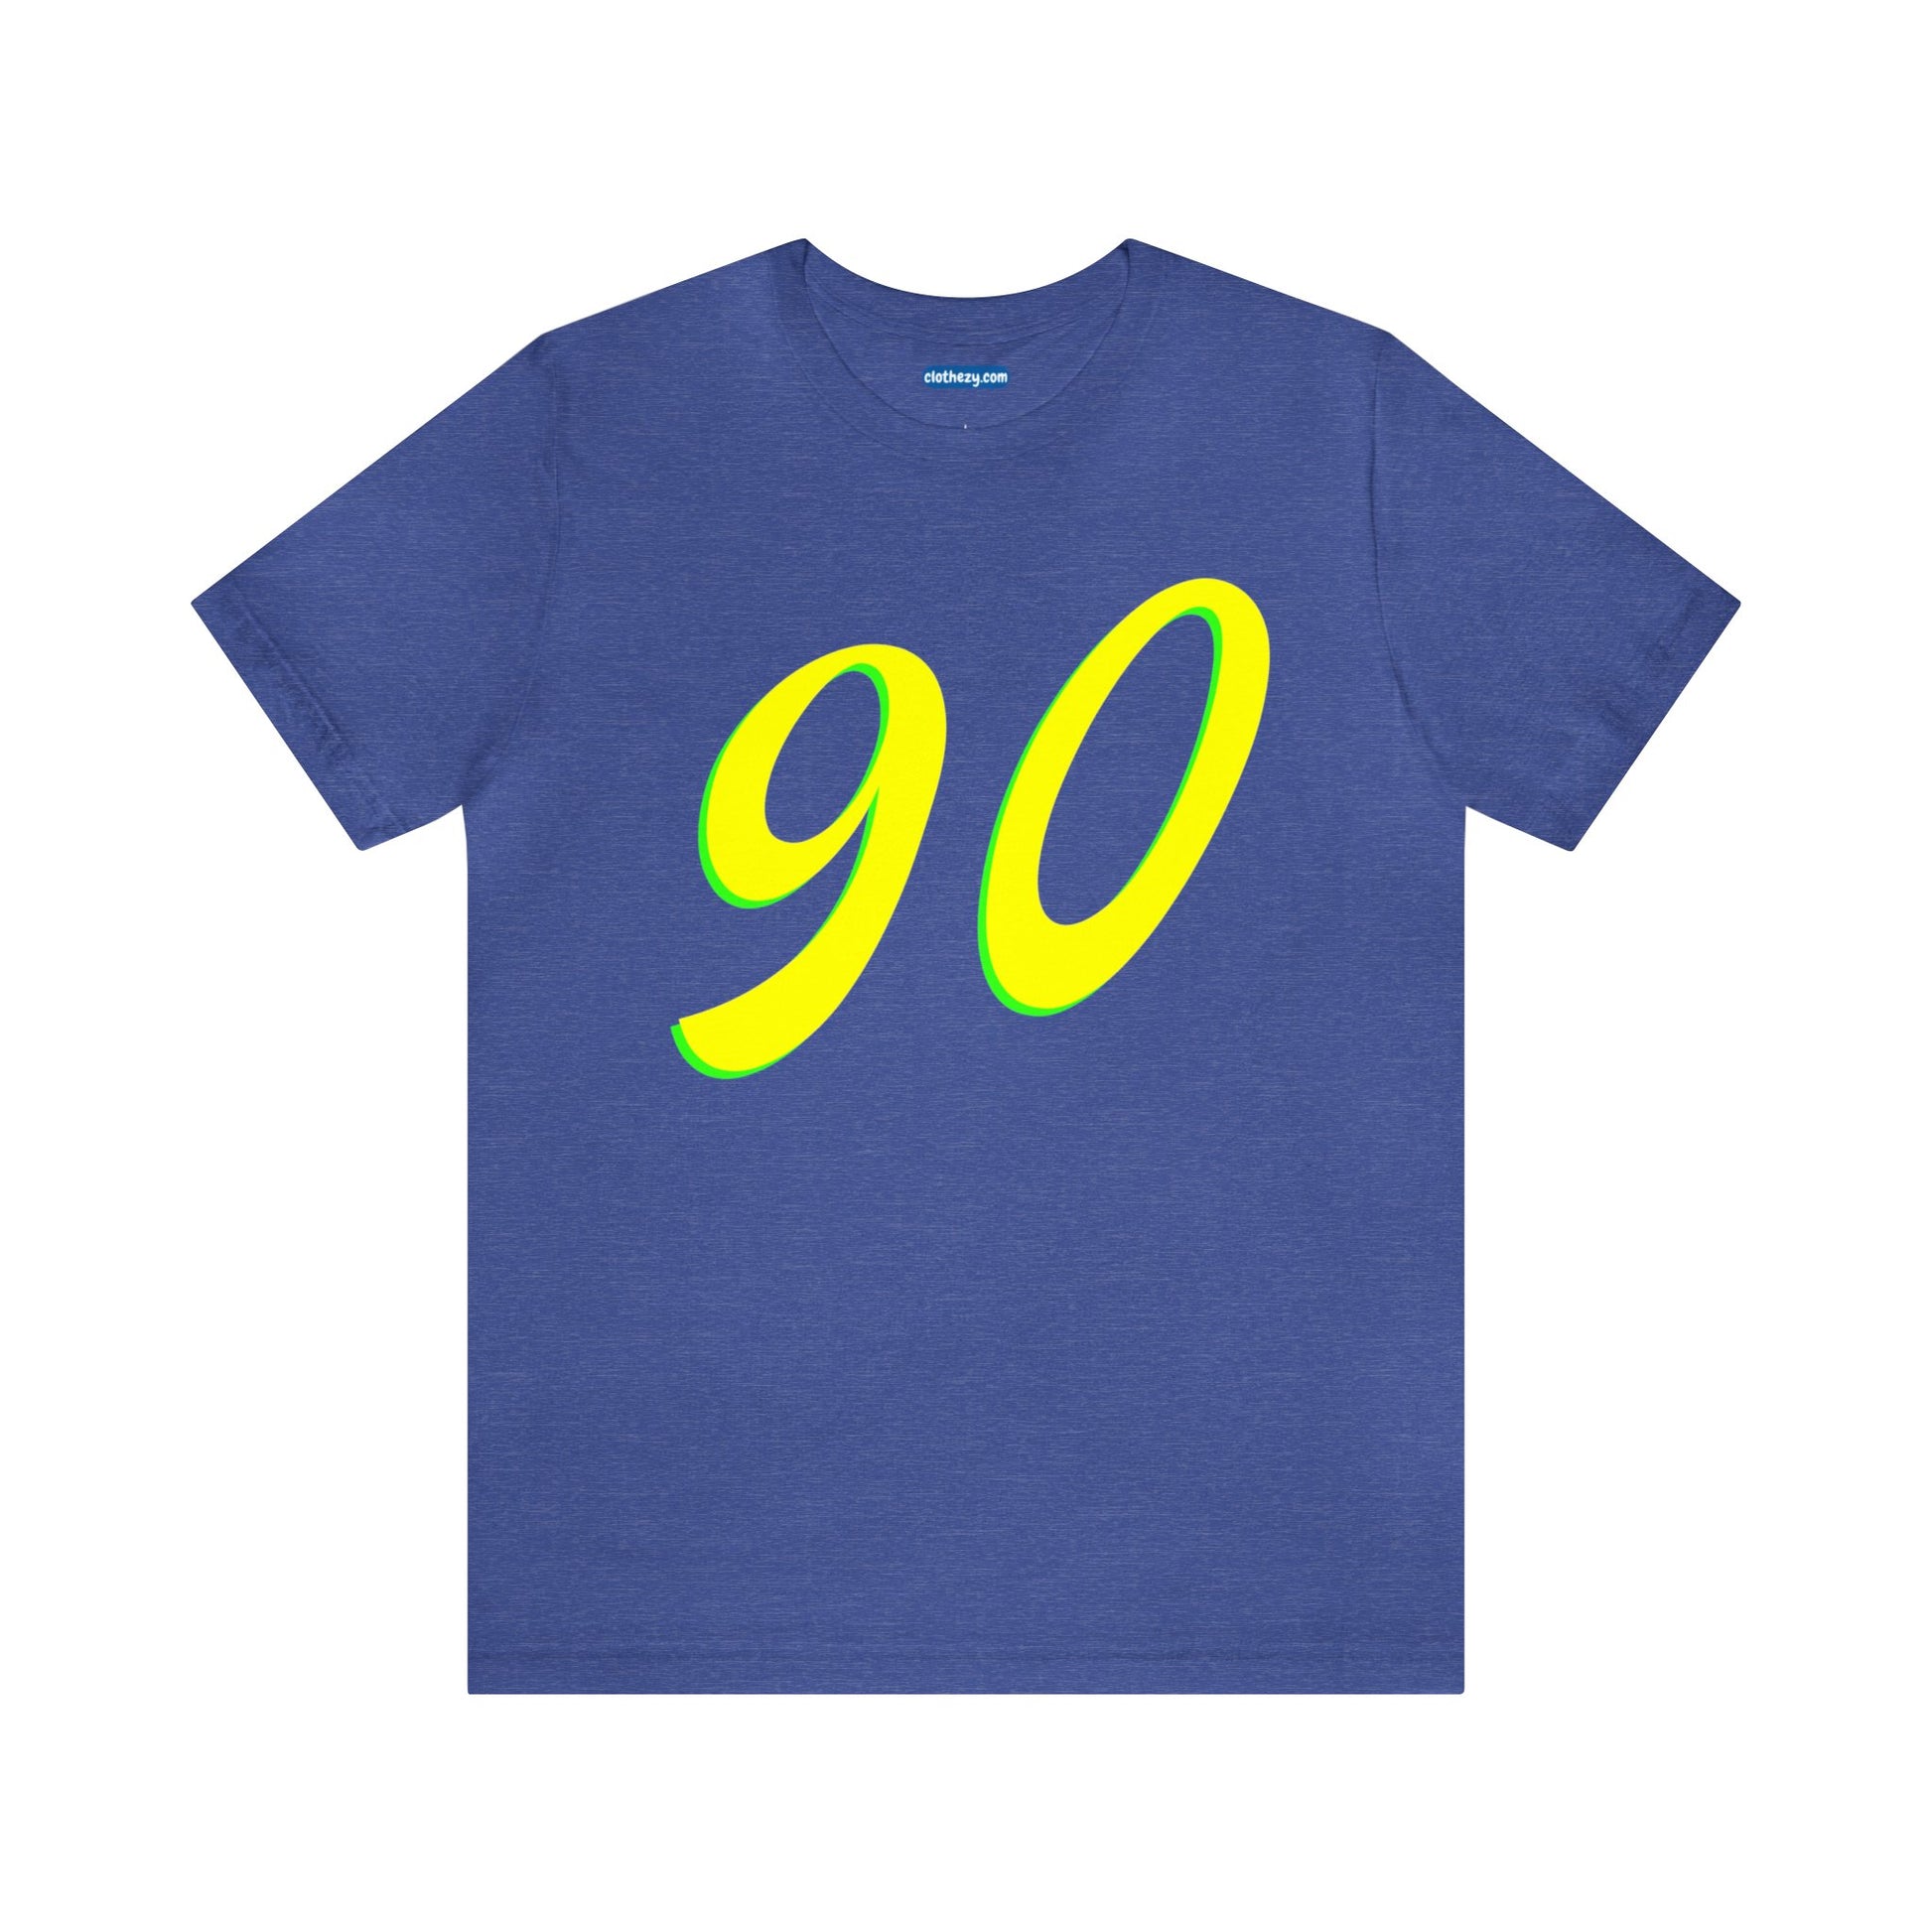 Number 90 Design - Soft Cotton Tee for birthdays and celebrations, Gift for friends and family, Multiple Options by clothezy.com in Navy Size Small - Buy Now